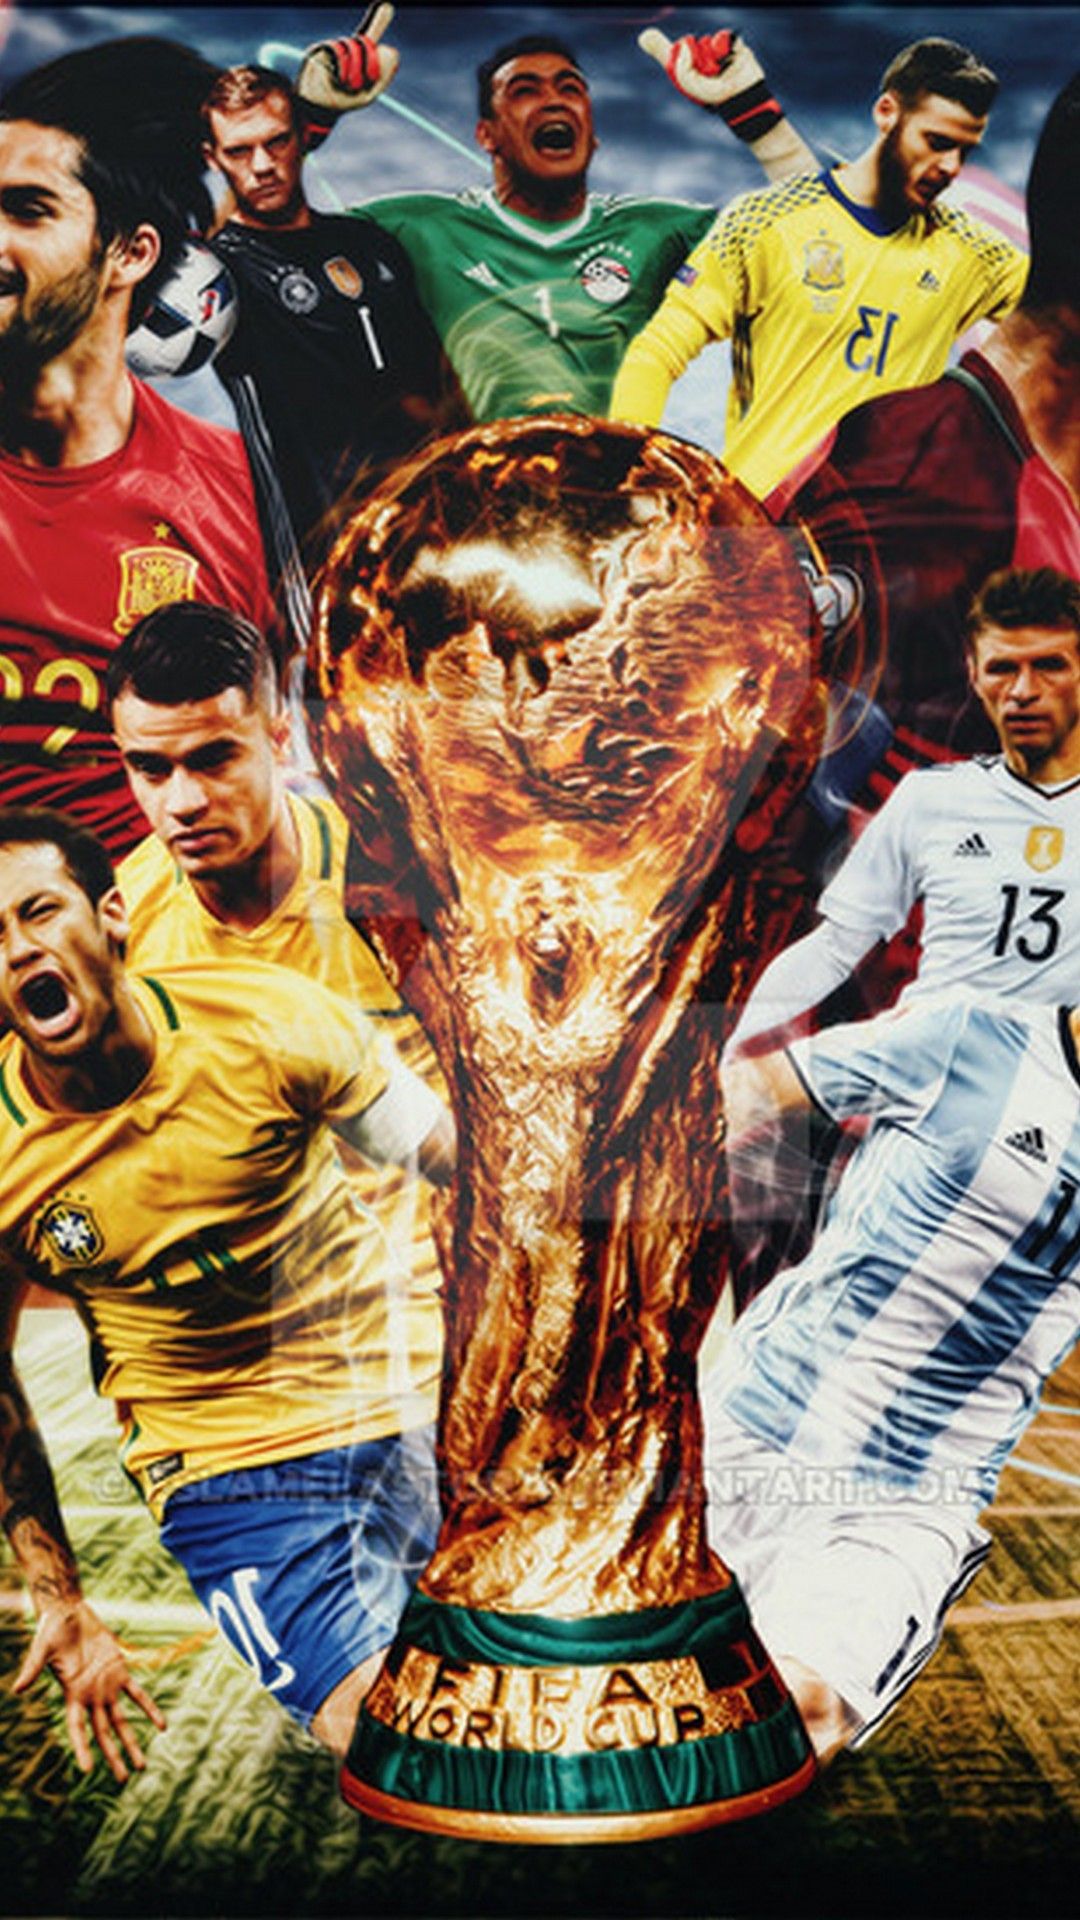 World Cup Wallpaper Free World Cup Background